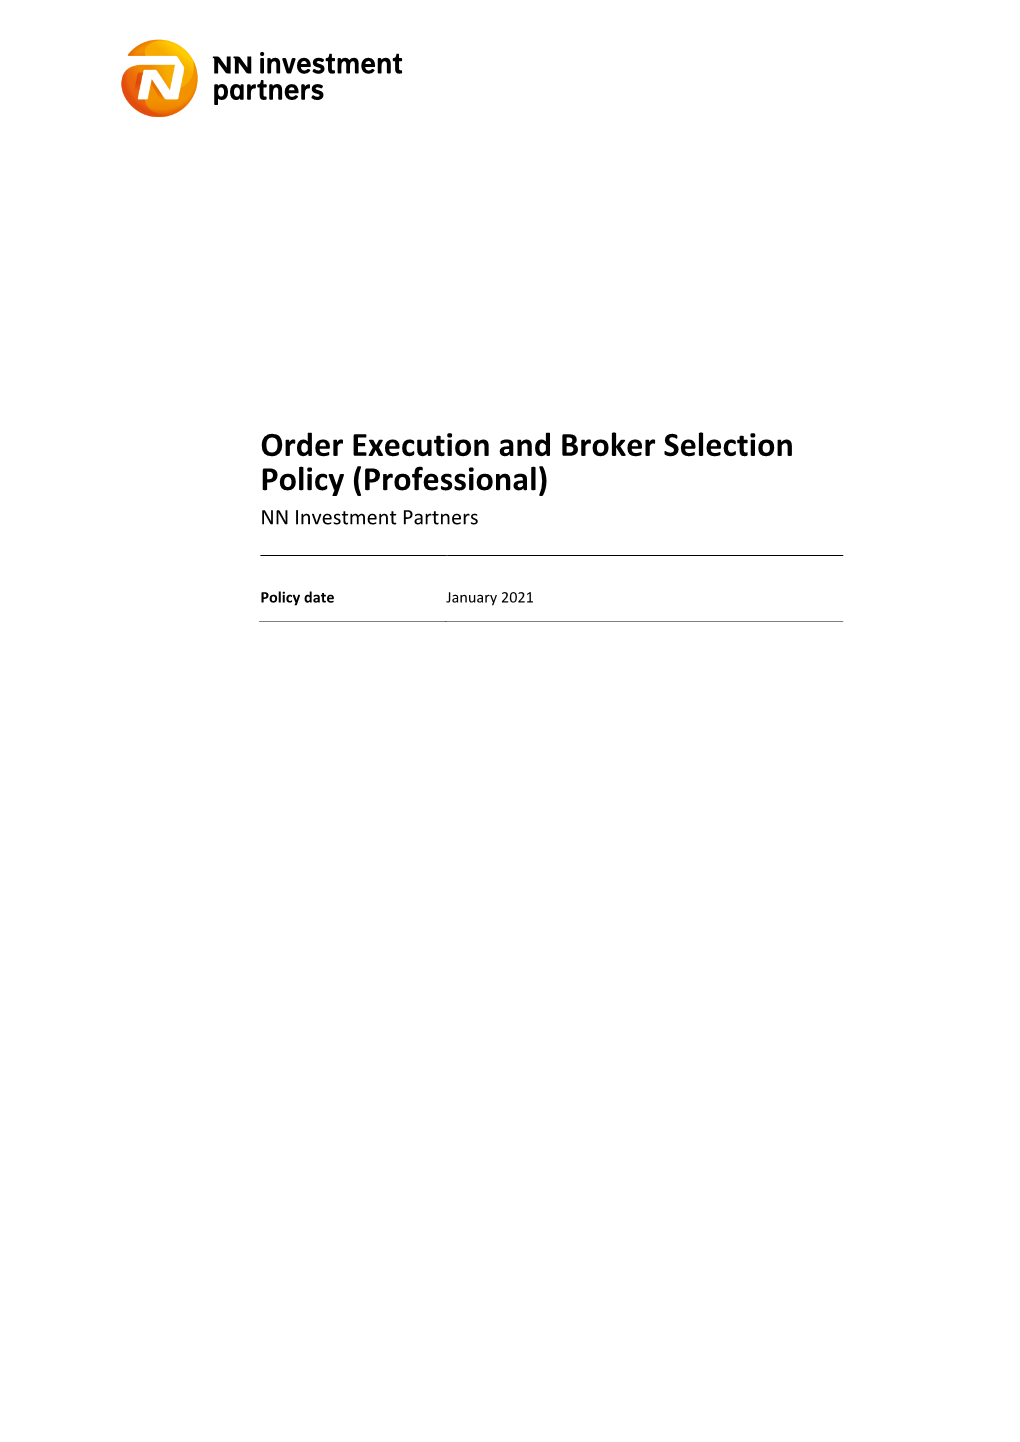 Order Execution and Broker Selection Policy (Professional) NN Investment Partners